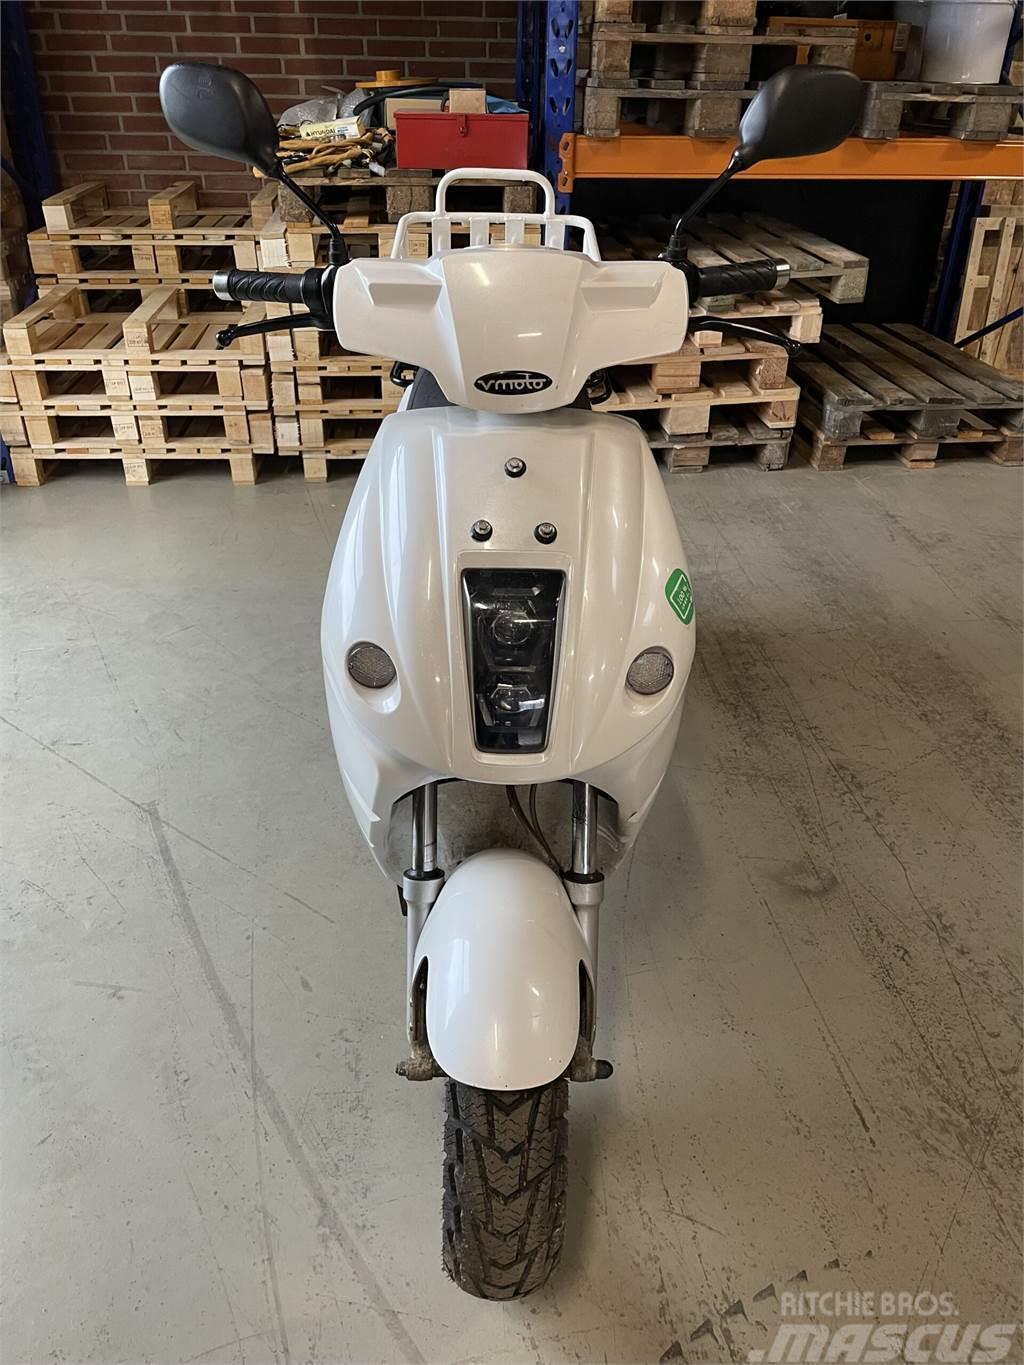  El-scooter V-Moto E-max, German Engineering, Itali Other components